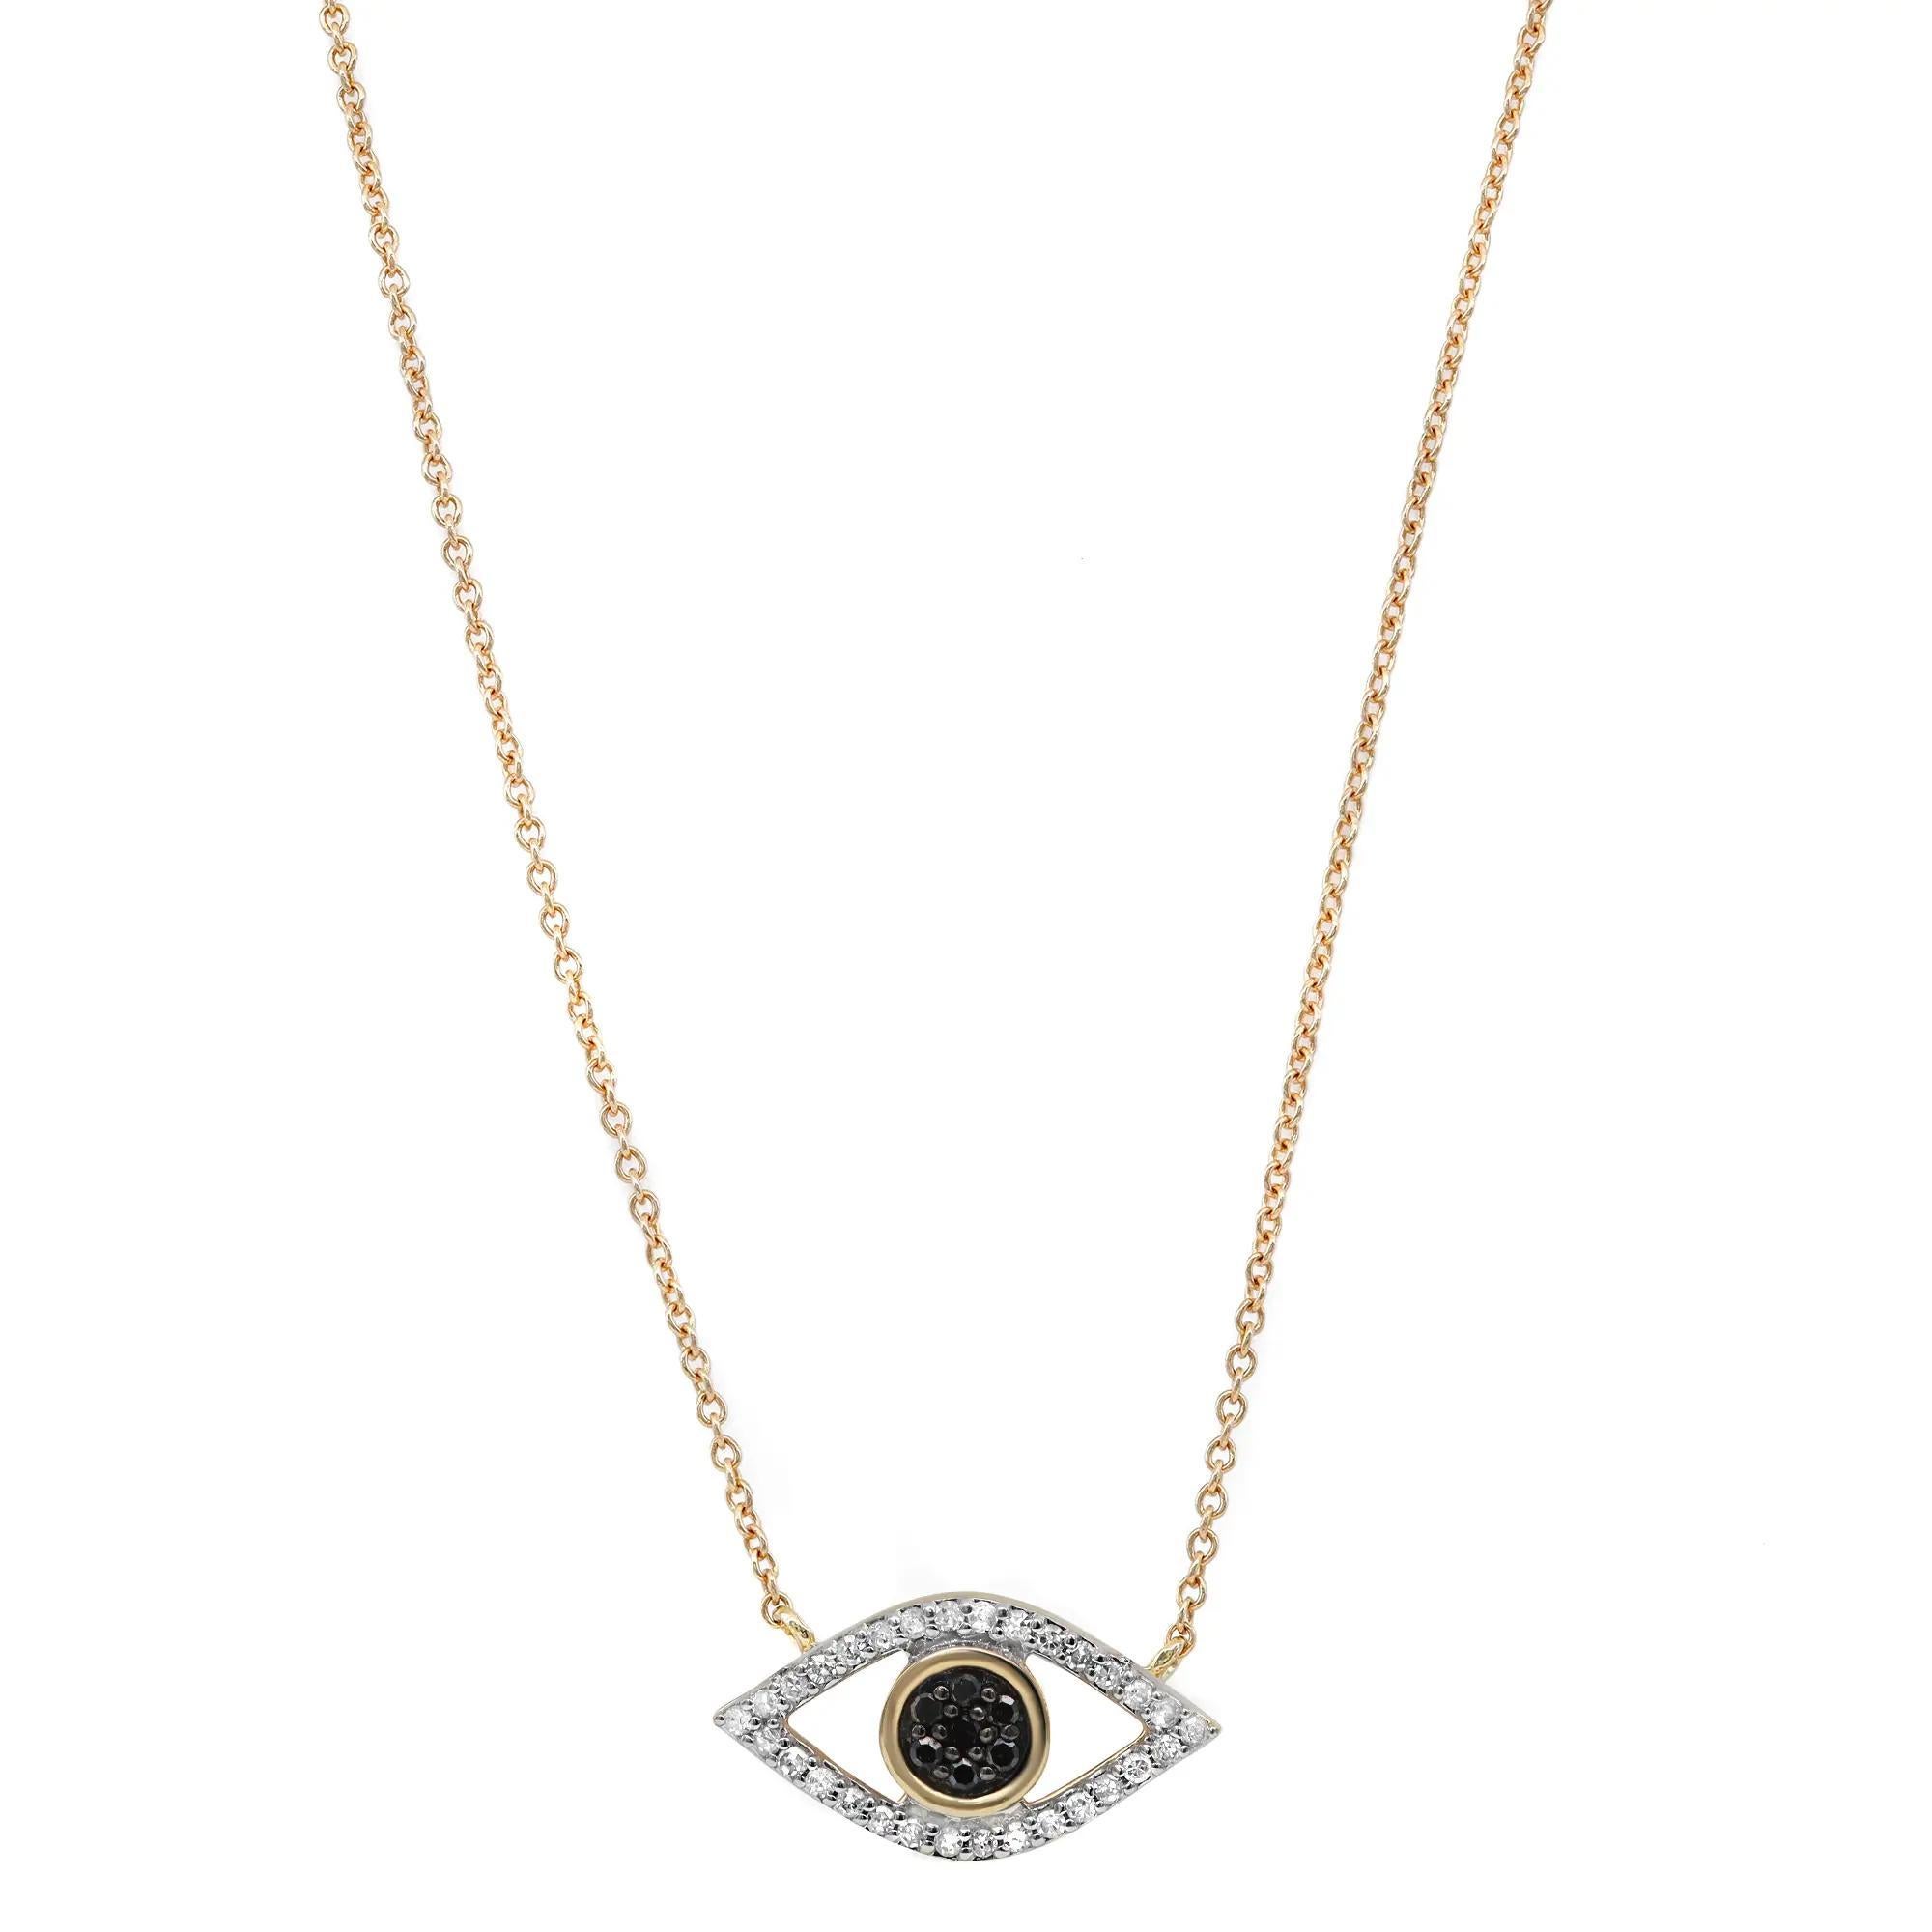 Evil Eye Pave Diamond Pendant Necklace In 14K Yellow Gold 0.18Cttw